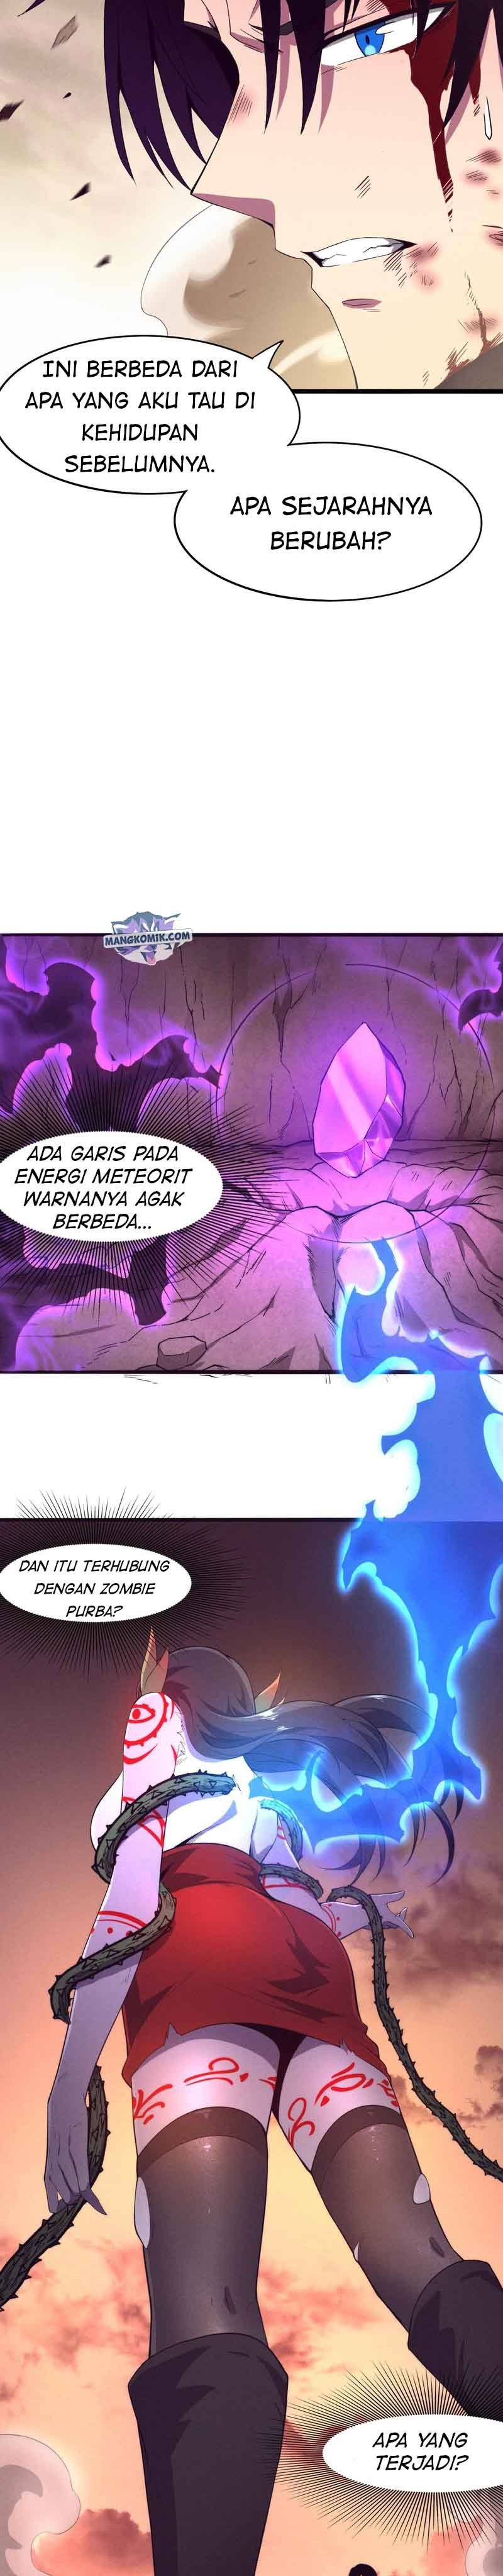 Evolution Frenzy Chapter 08 bahasa indoensia